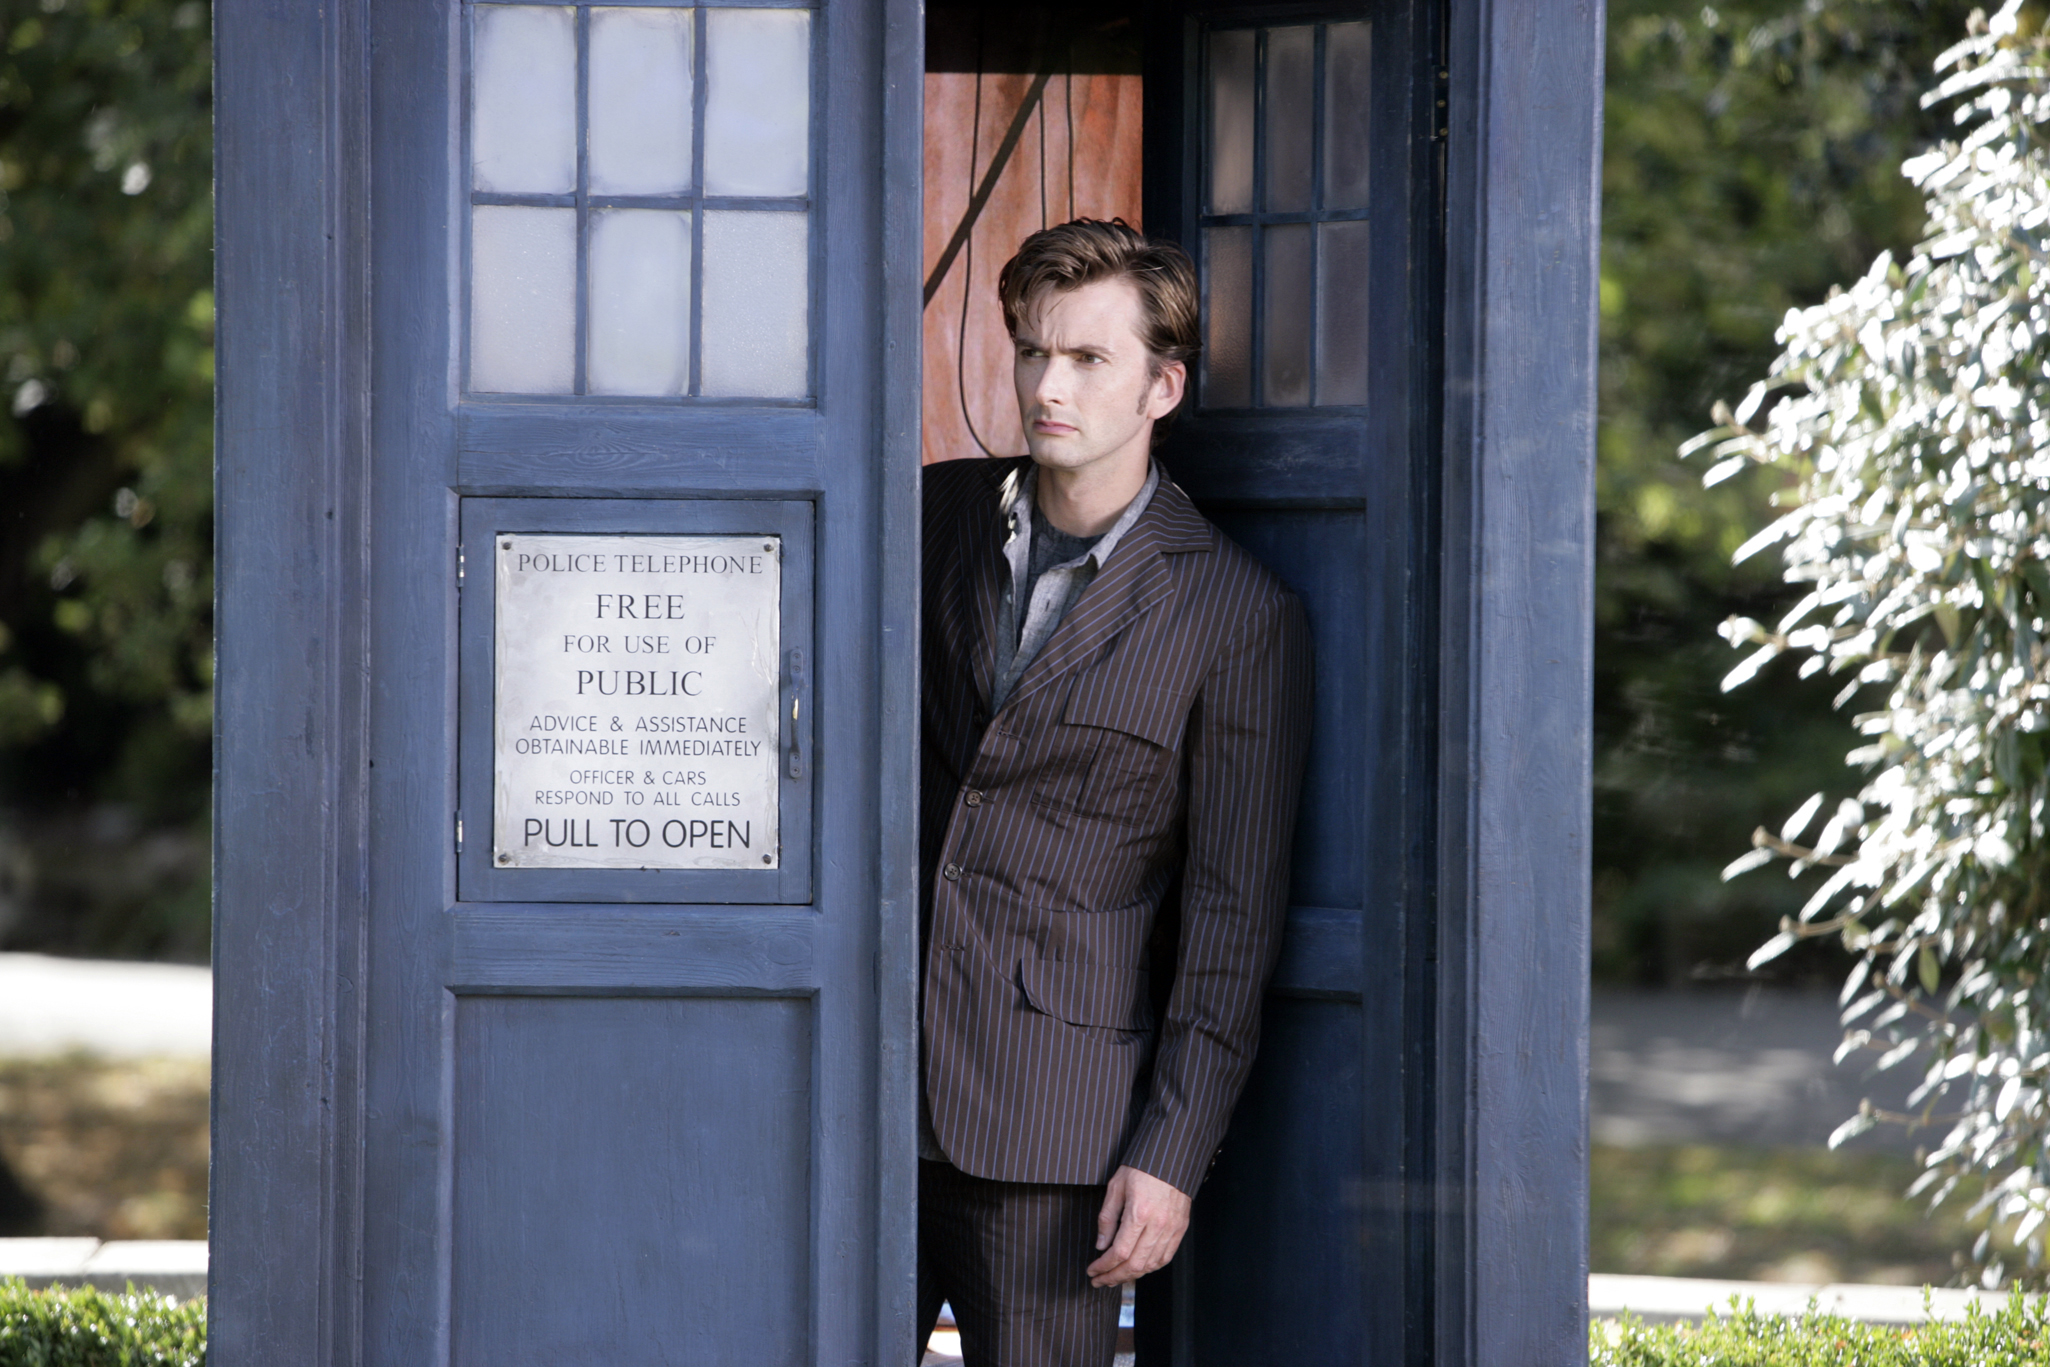 tardis, doctor who, tv show images